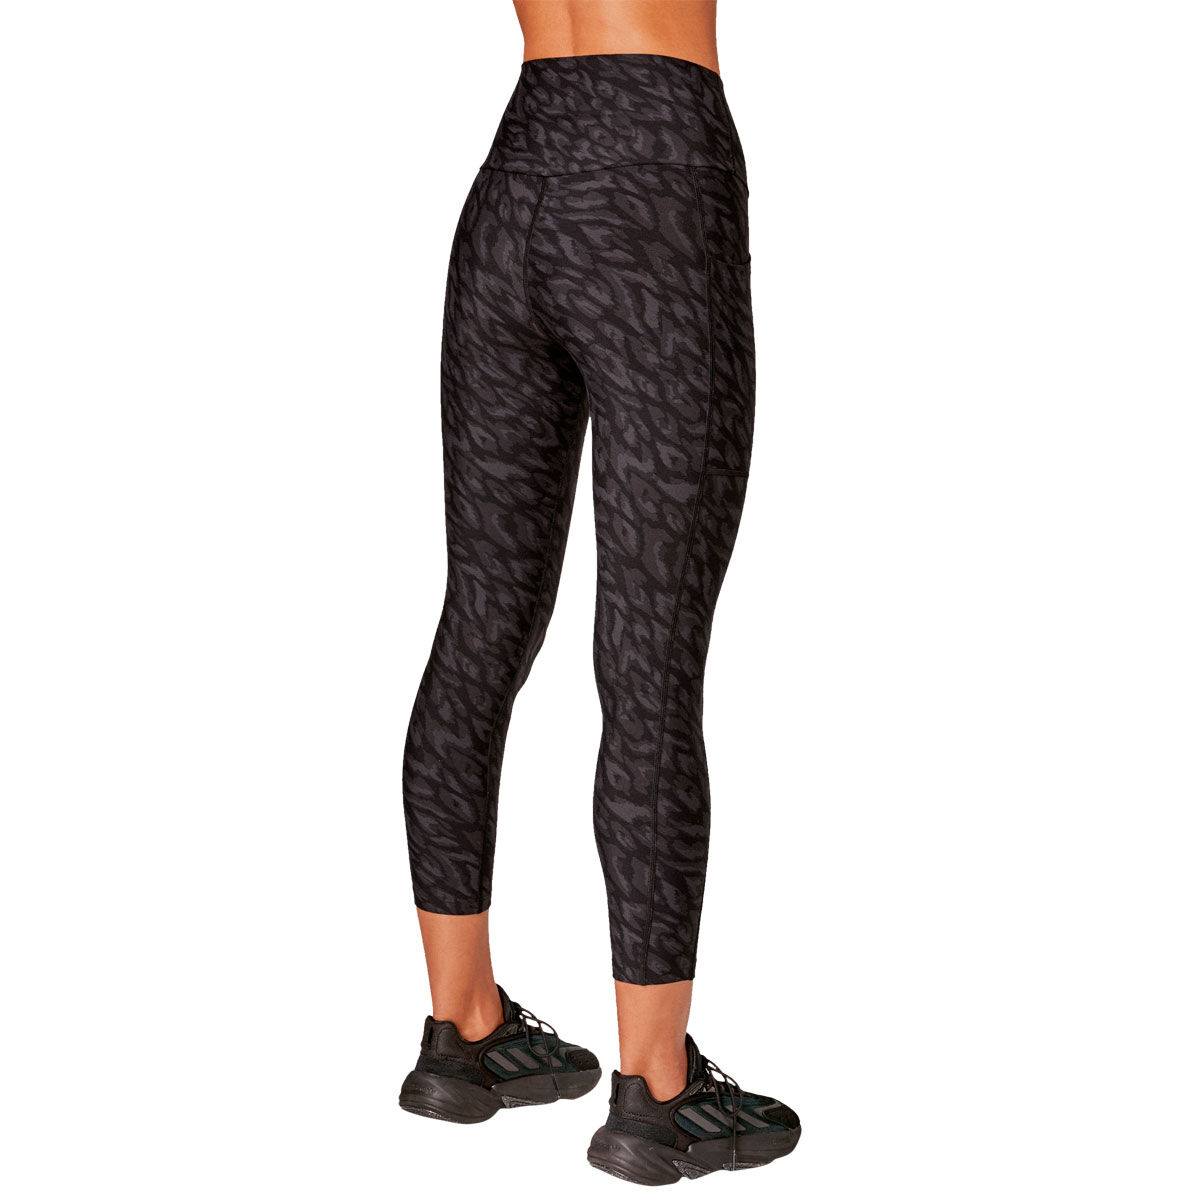 Peach Me Workout Leggings- Black. Women's Workout Tights- Running Bare